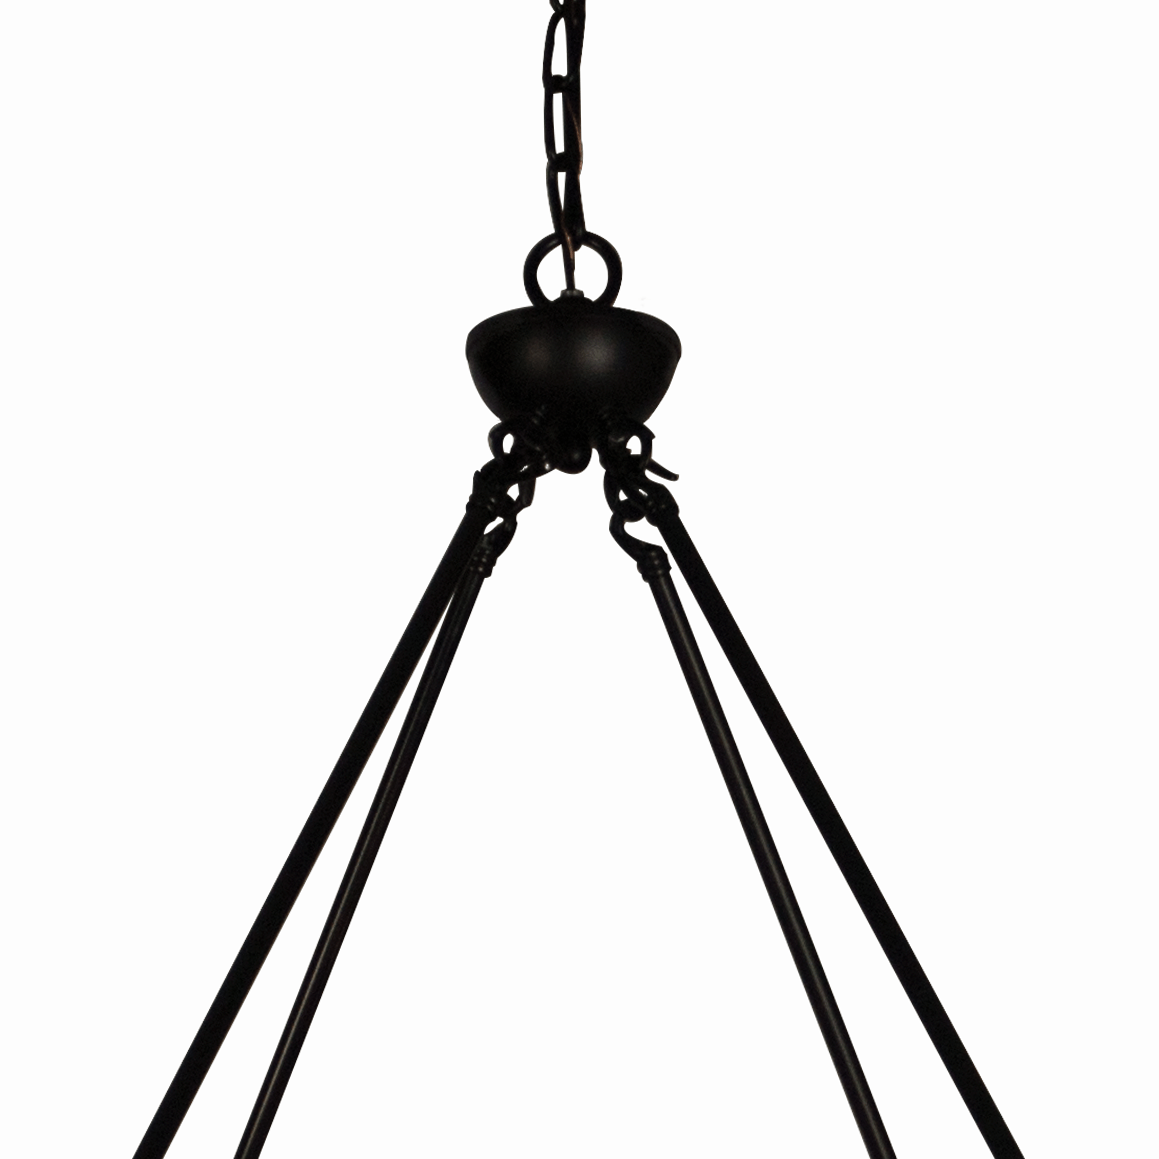 Cahua 8 Light Drum Chandelier (16” Wide) Steel Frame with Wooden Pattern | Dining Room, Foyer, Entryway or Living Room Decor Chandeliers Canyon Home 